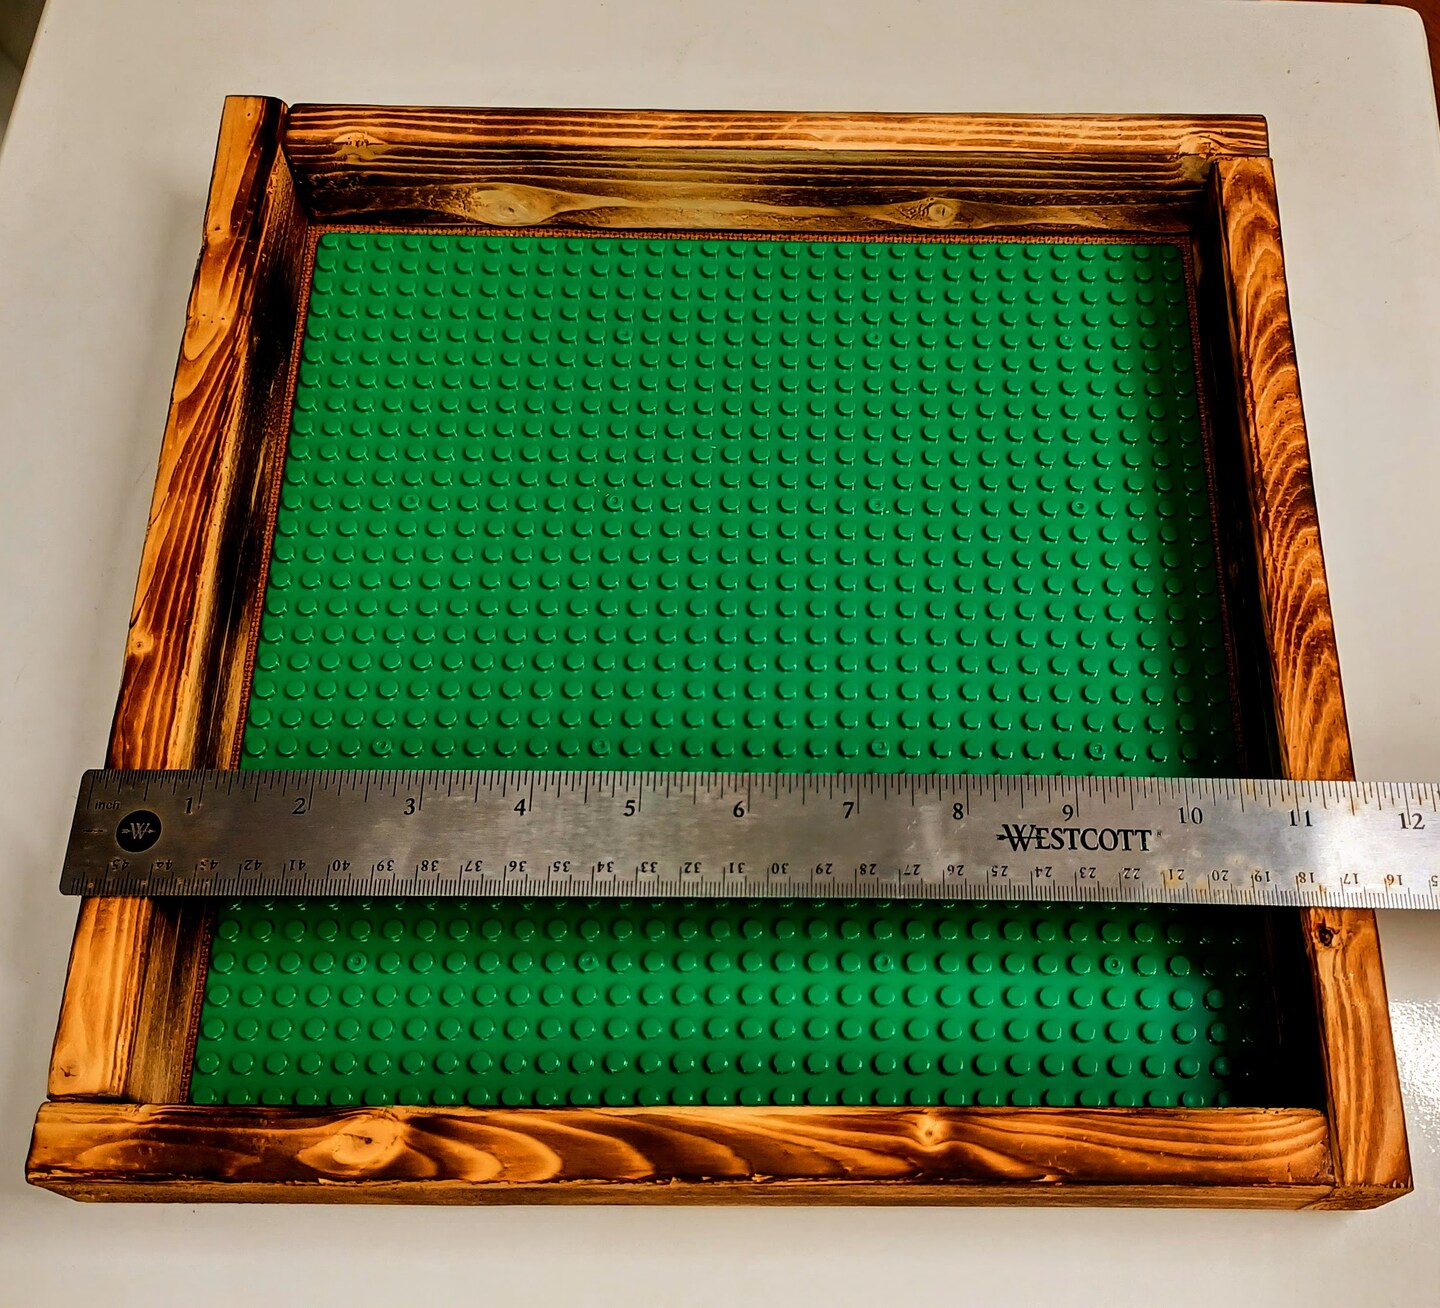 Kendalls Woodworking: Finished project: LEGO building tray +